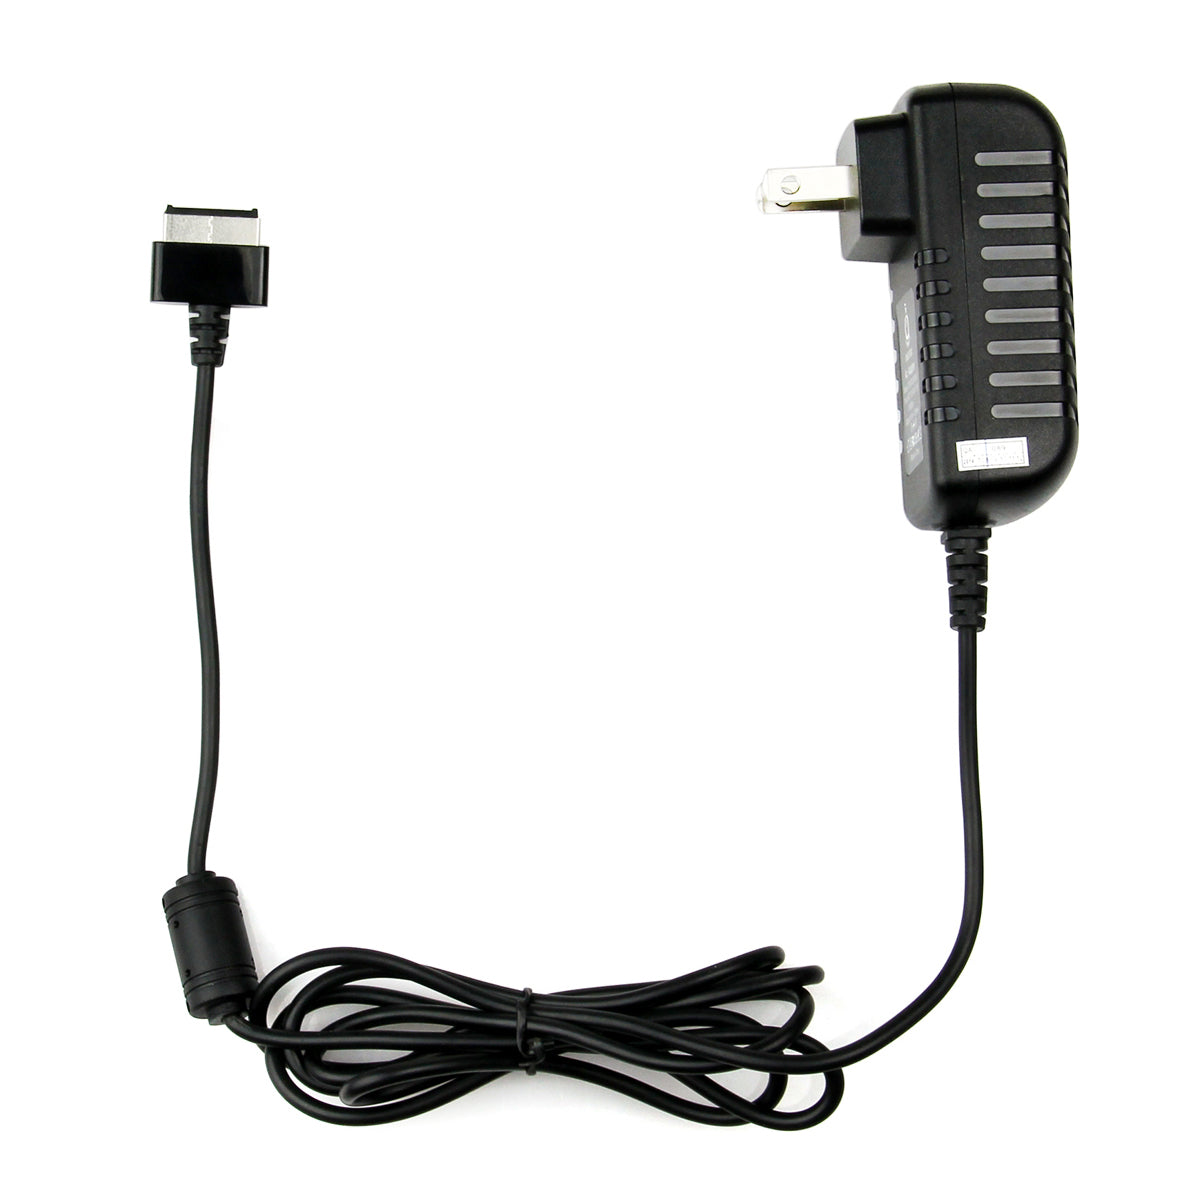 AC Adapter Charger for ASUS TF300T B2 Eee Pad.